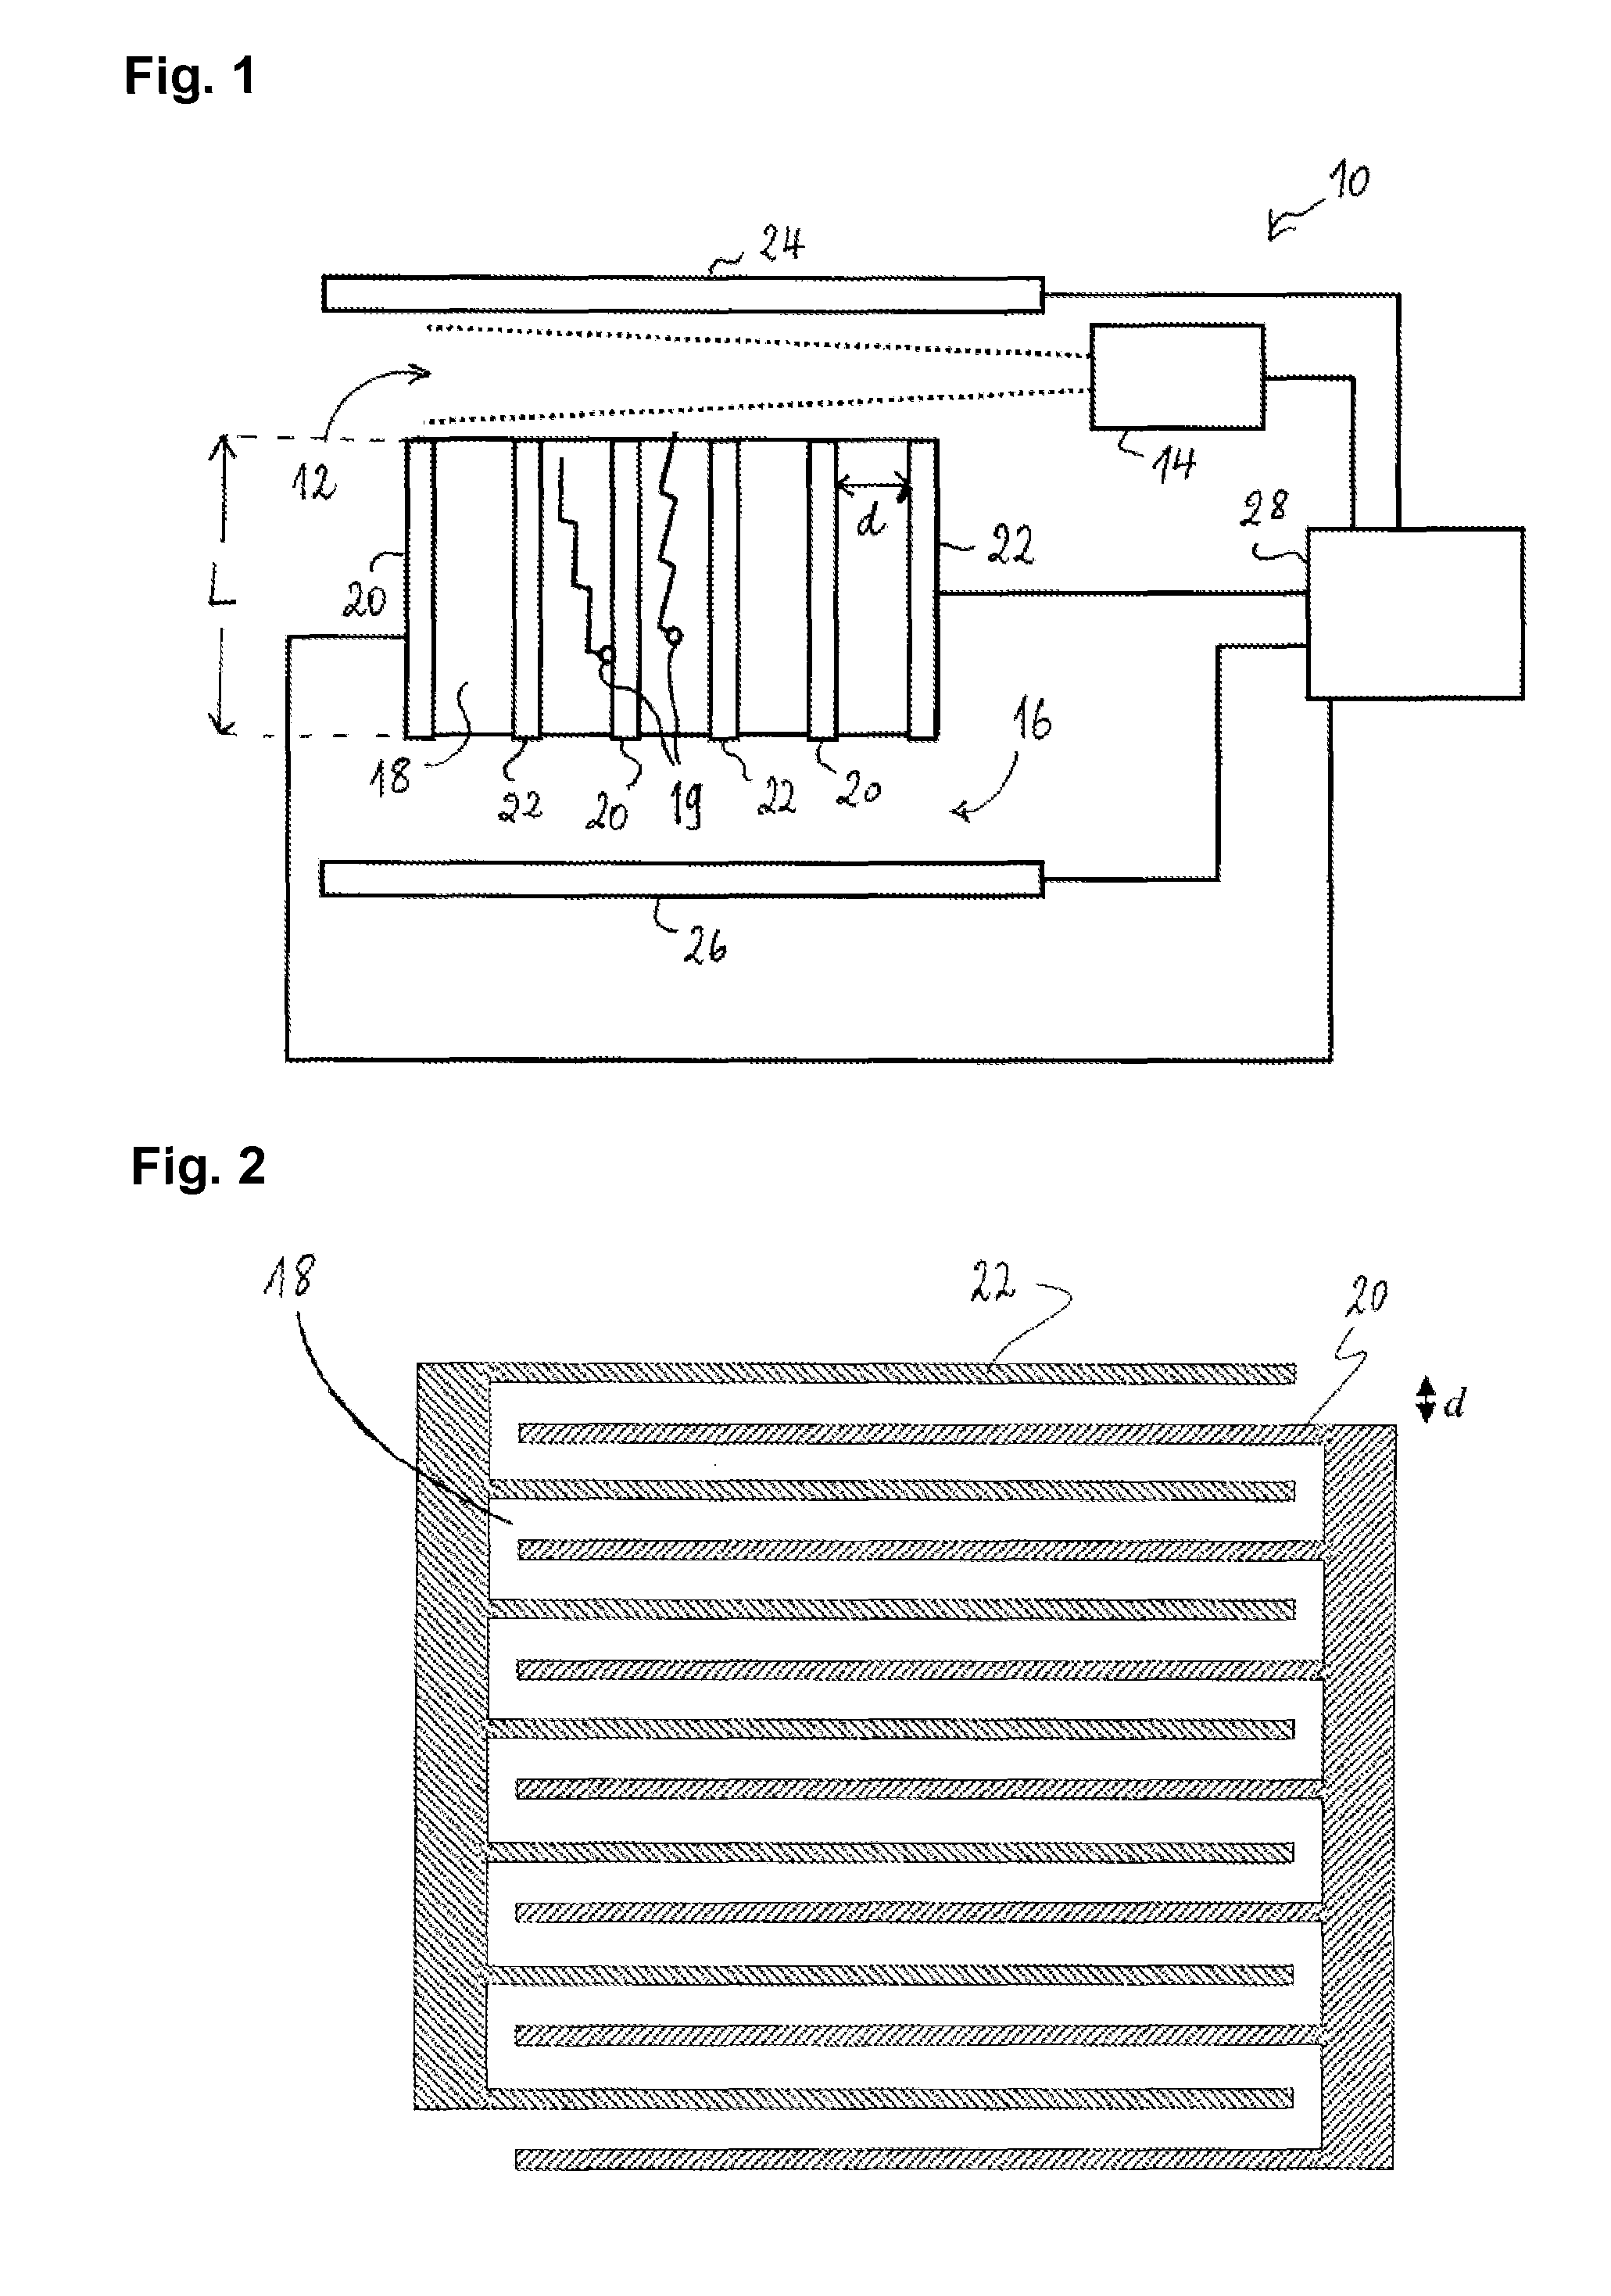 Differential mobility spectrometer with asymmetrically oscillating driving electrical field